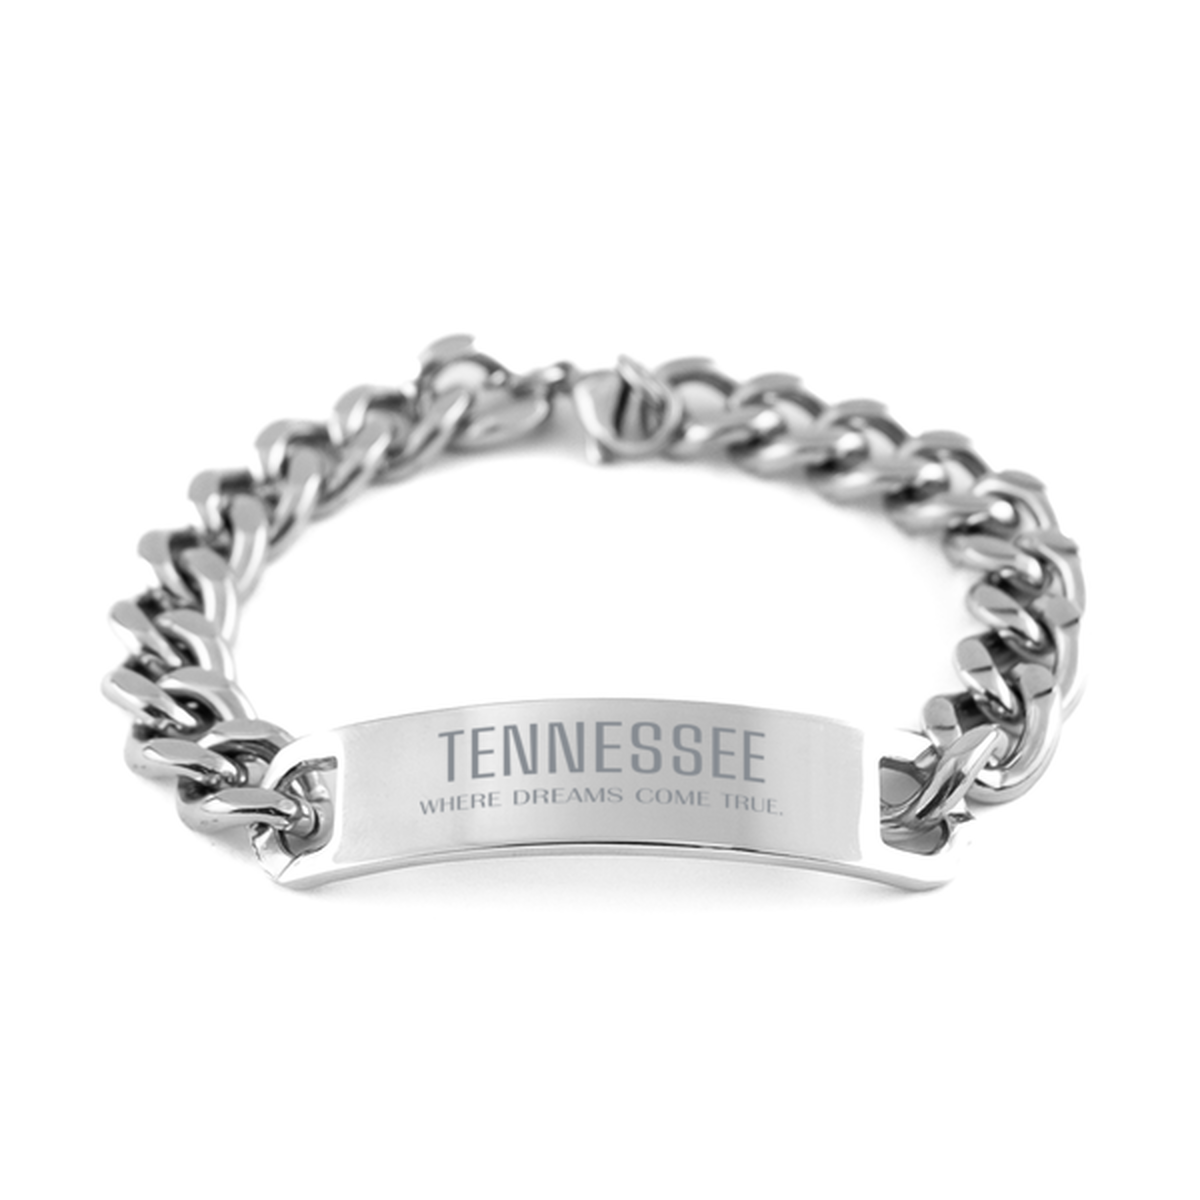 Love Tennessee State Cuban Chain Stainless Steel Bracelet, Tennessee Where dreams come true, Birthday Inspirational Gifts For Tennessee Men, Women, Friends